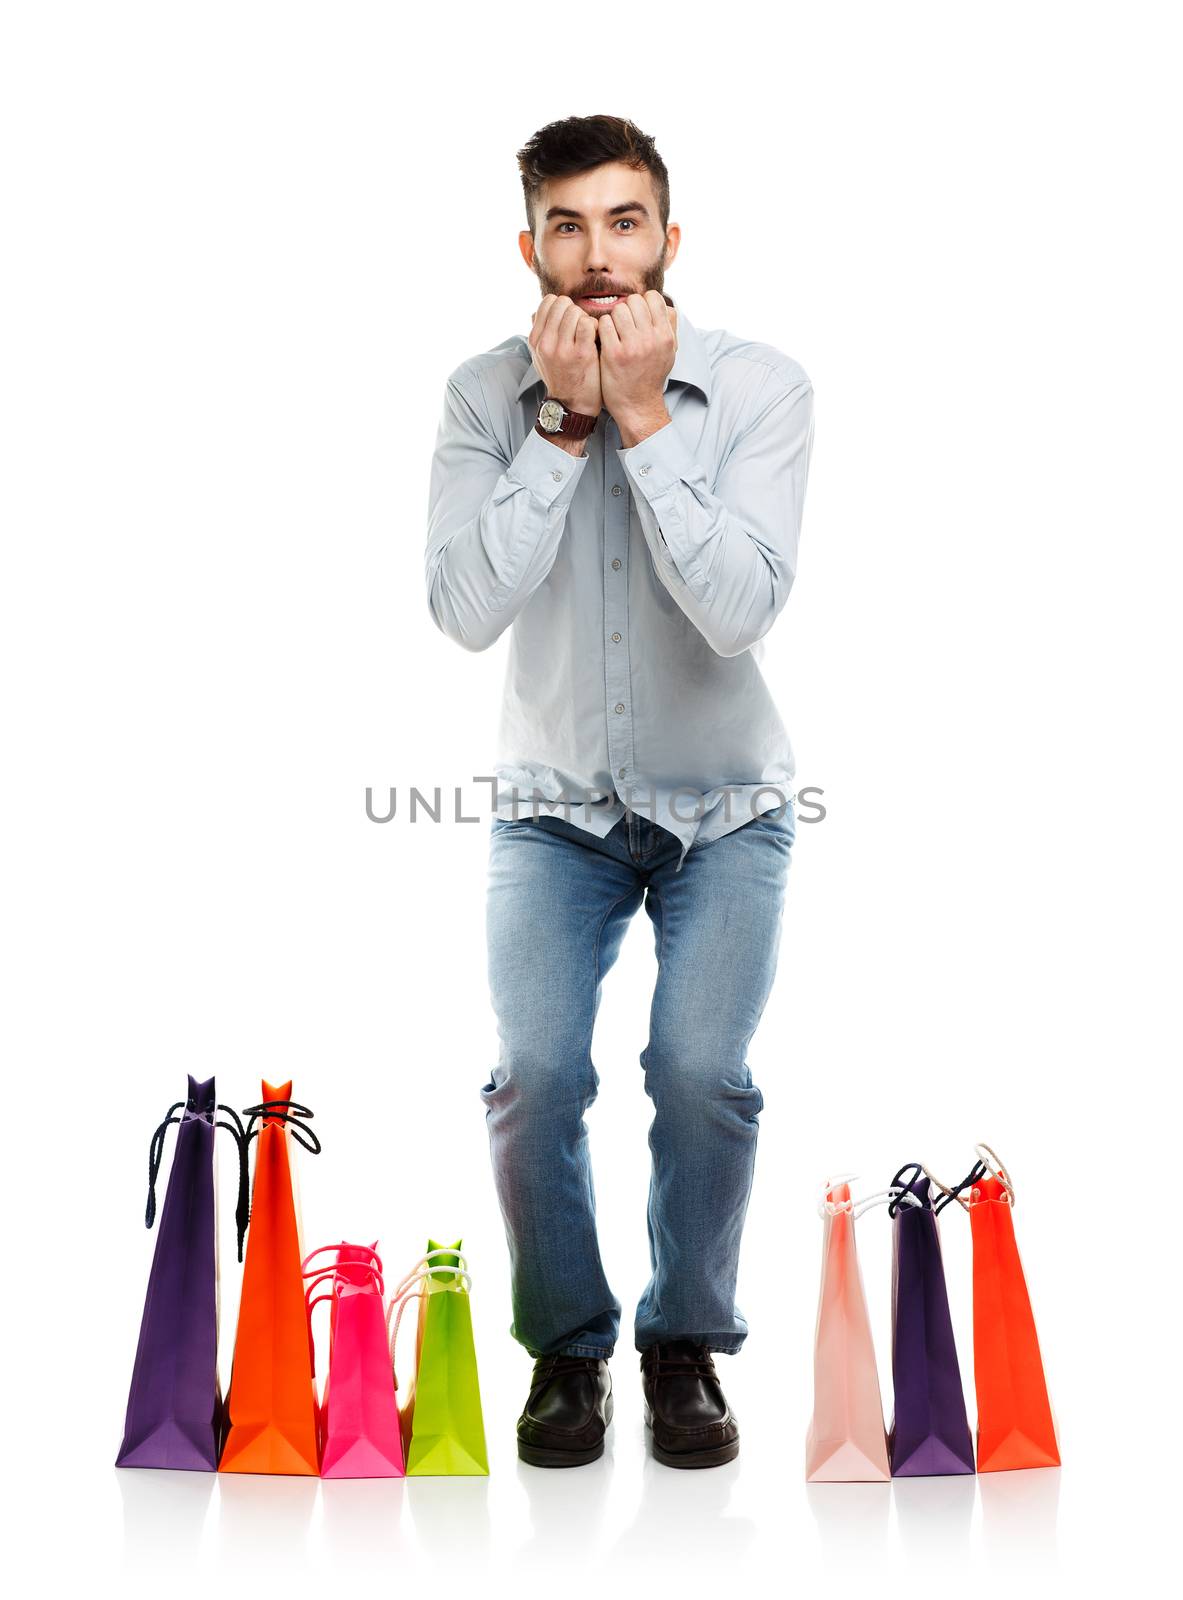 Handsome man with shopping bags is shocked. Christmas and holidays concept